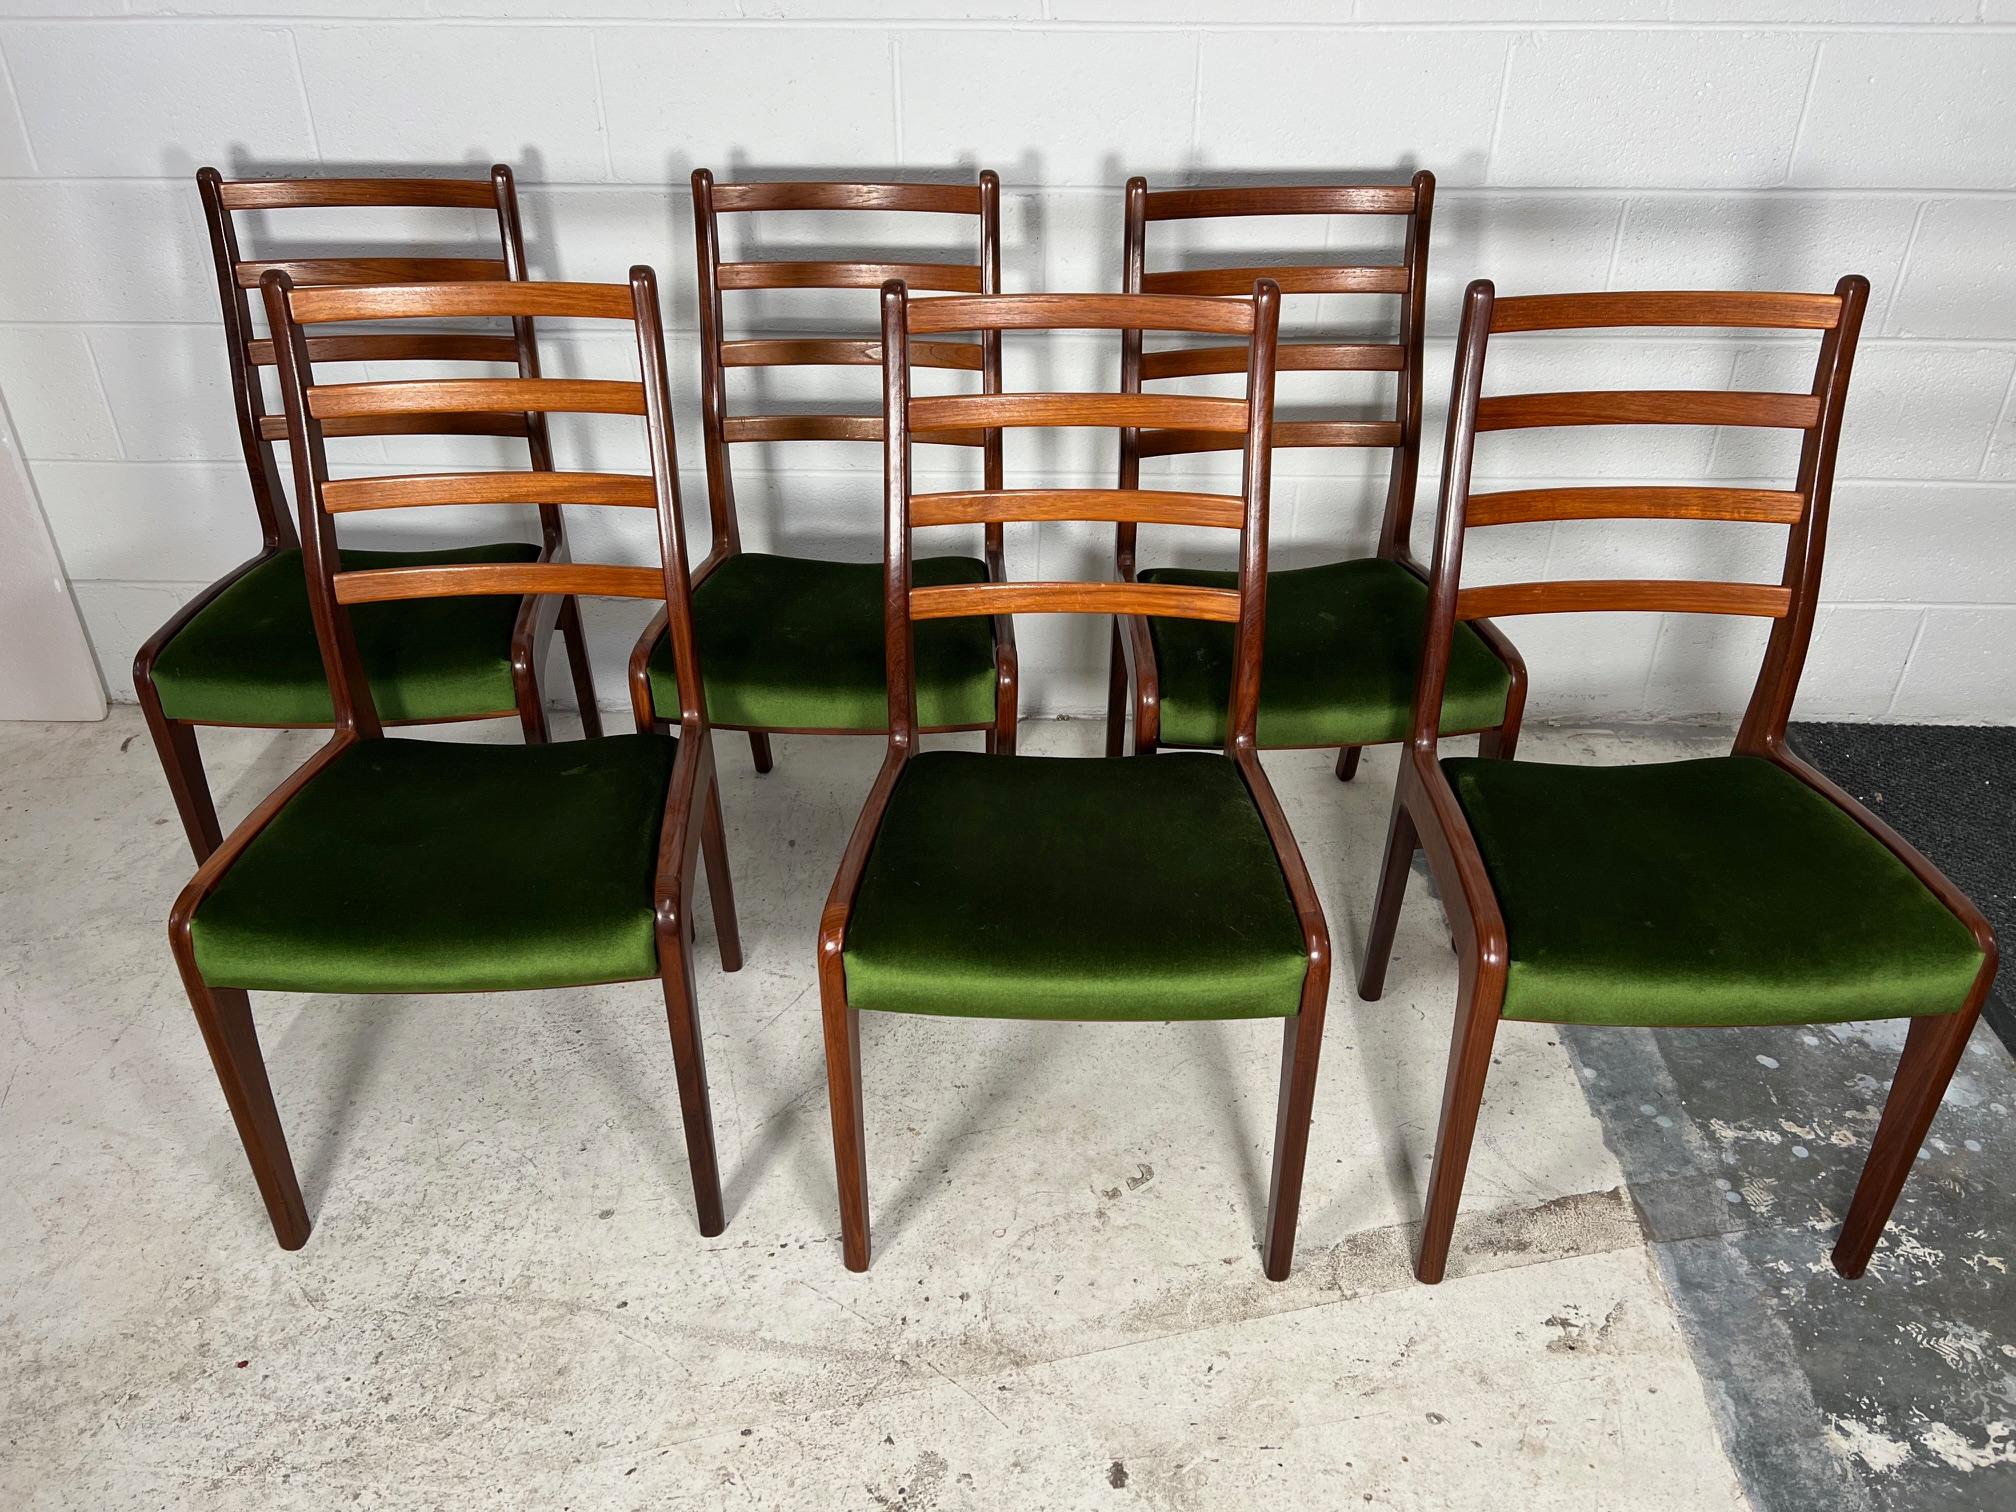 Set of 6 mid century teak chairs by G Plan.

Very good vintage condition. Some minor marks on the frames. Upholstery not original. Some of the chairs have had the joints glued in the past. All the chairs are very sturdy with no loose